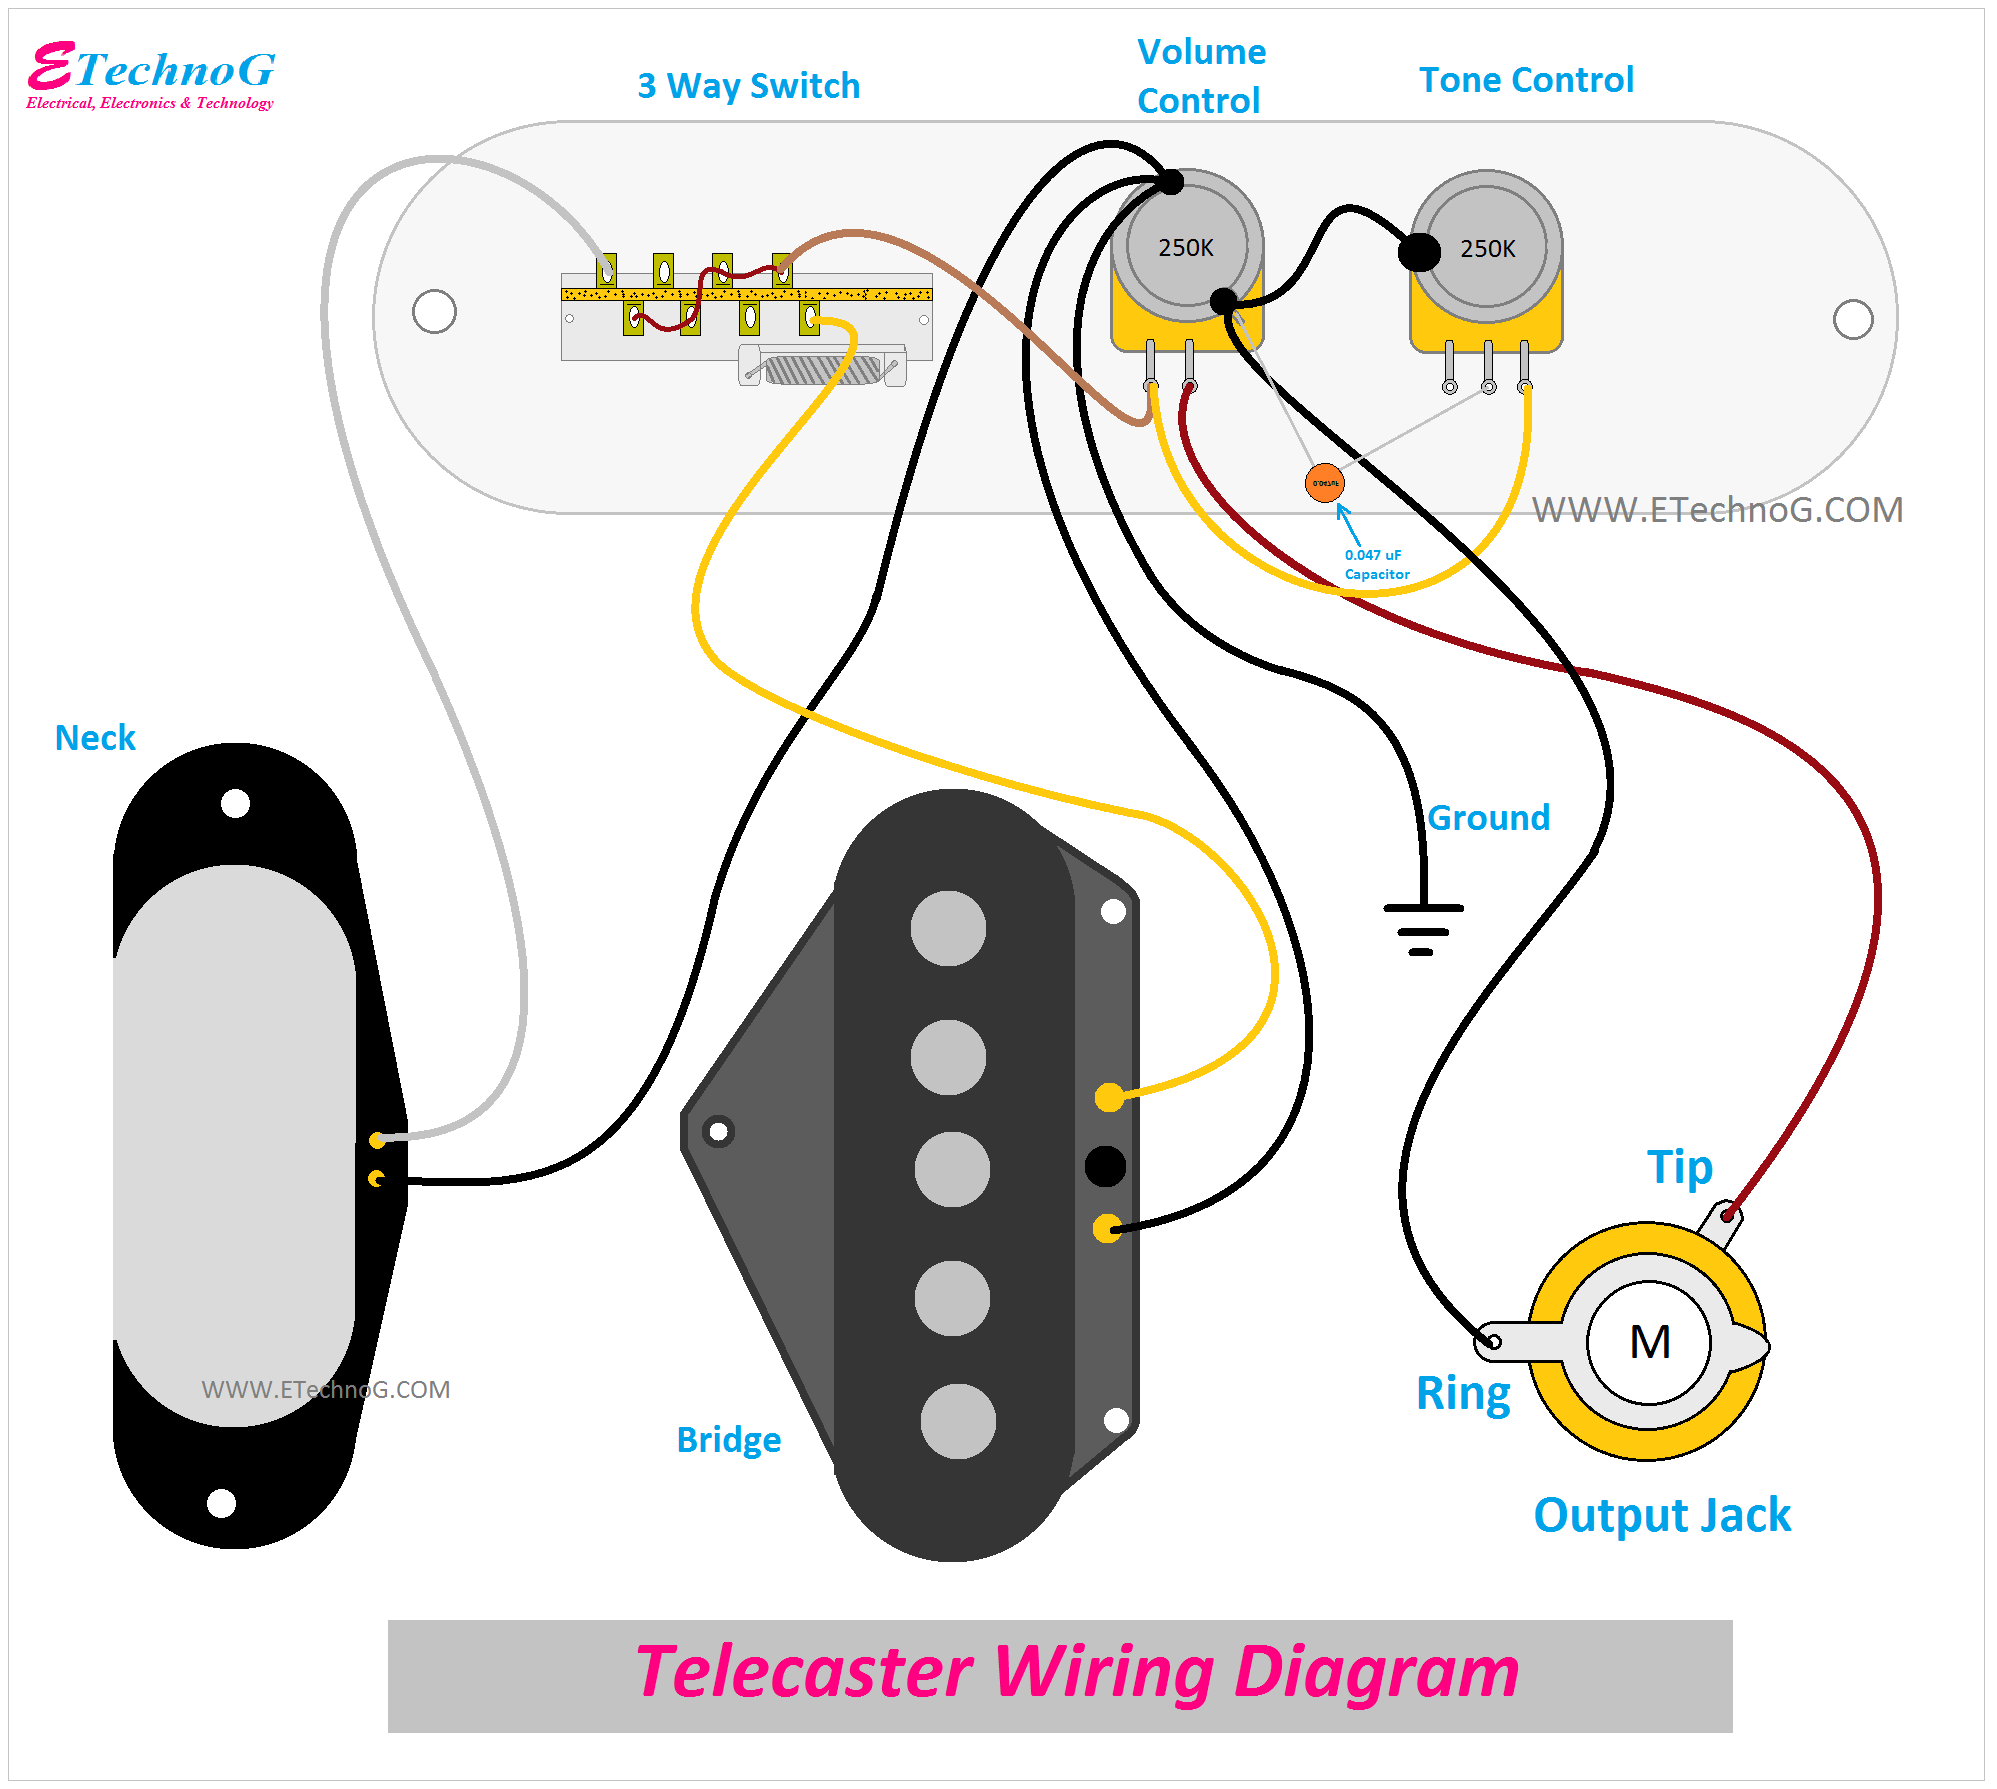 Telecaster Wiring Diagram, Wiring for telecaster, telecaster wiring with 3 way switch, standard diagram